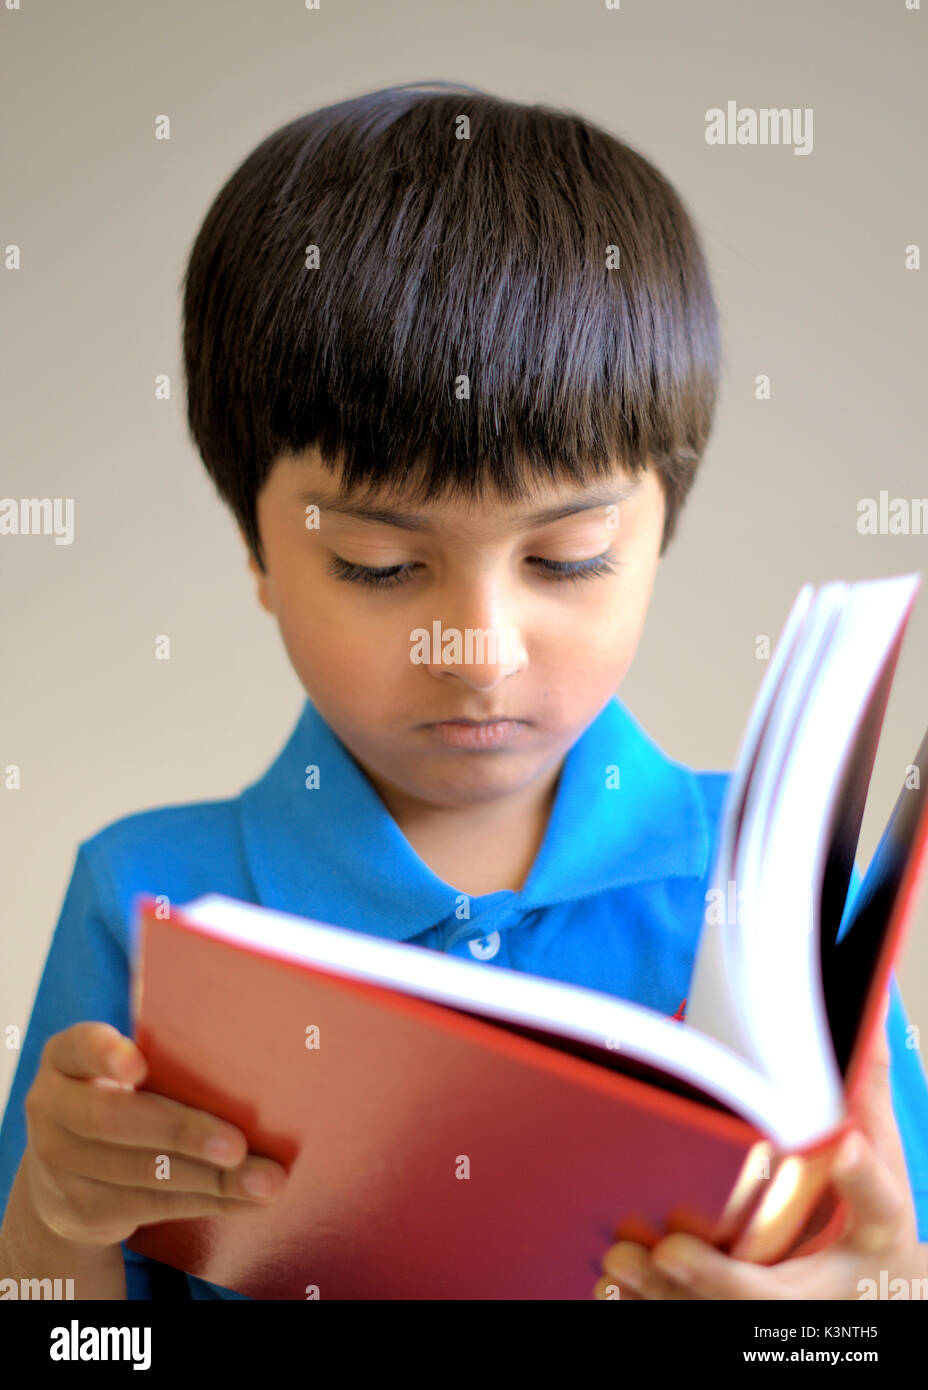 Kid reading book. Boy holding a book. Kid looking into the book. Stock Photo